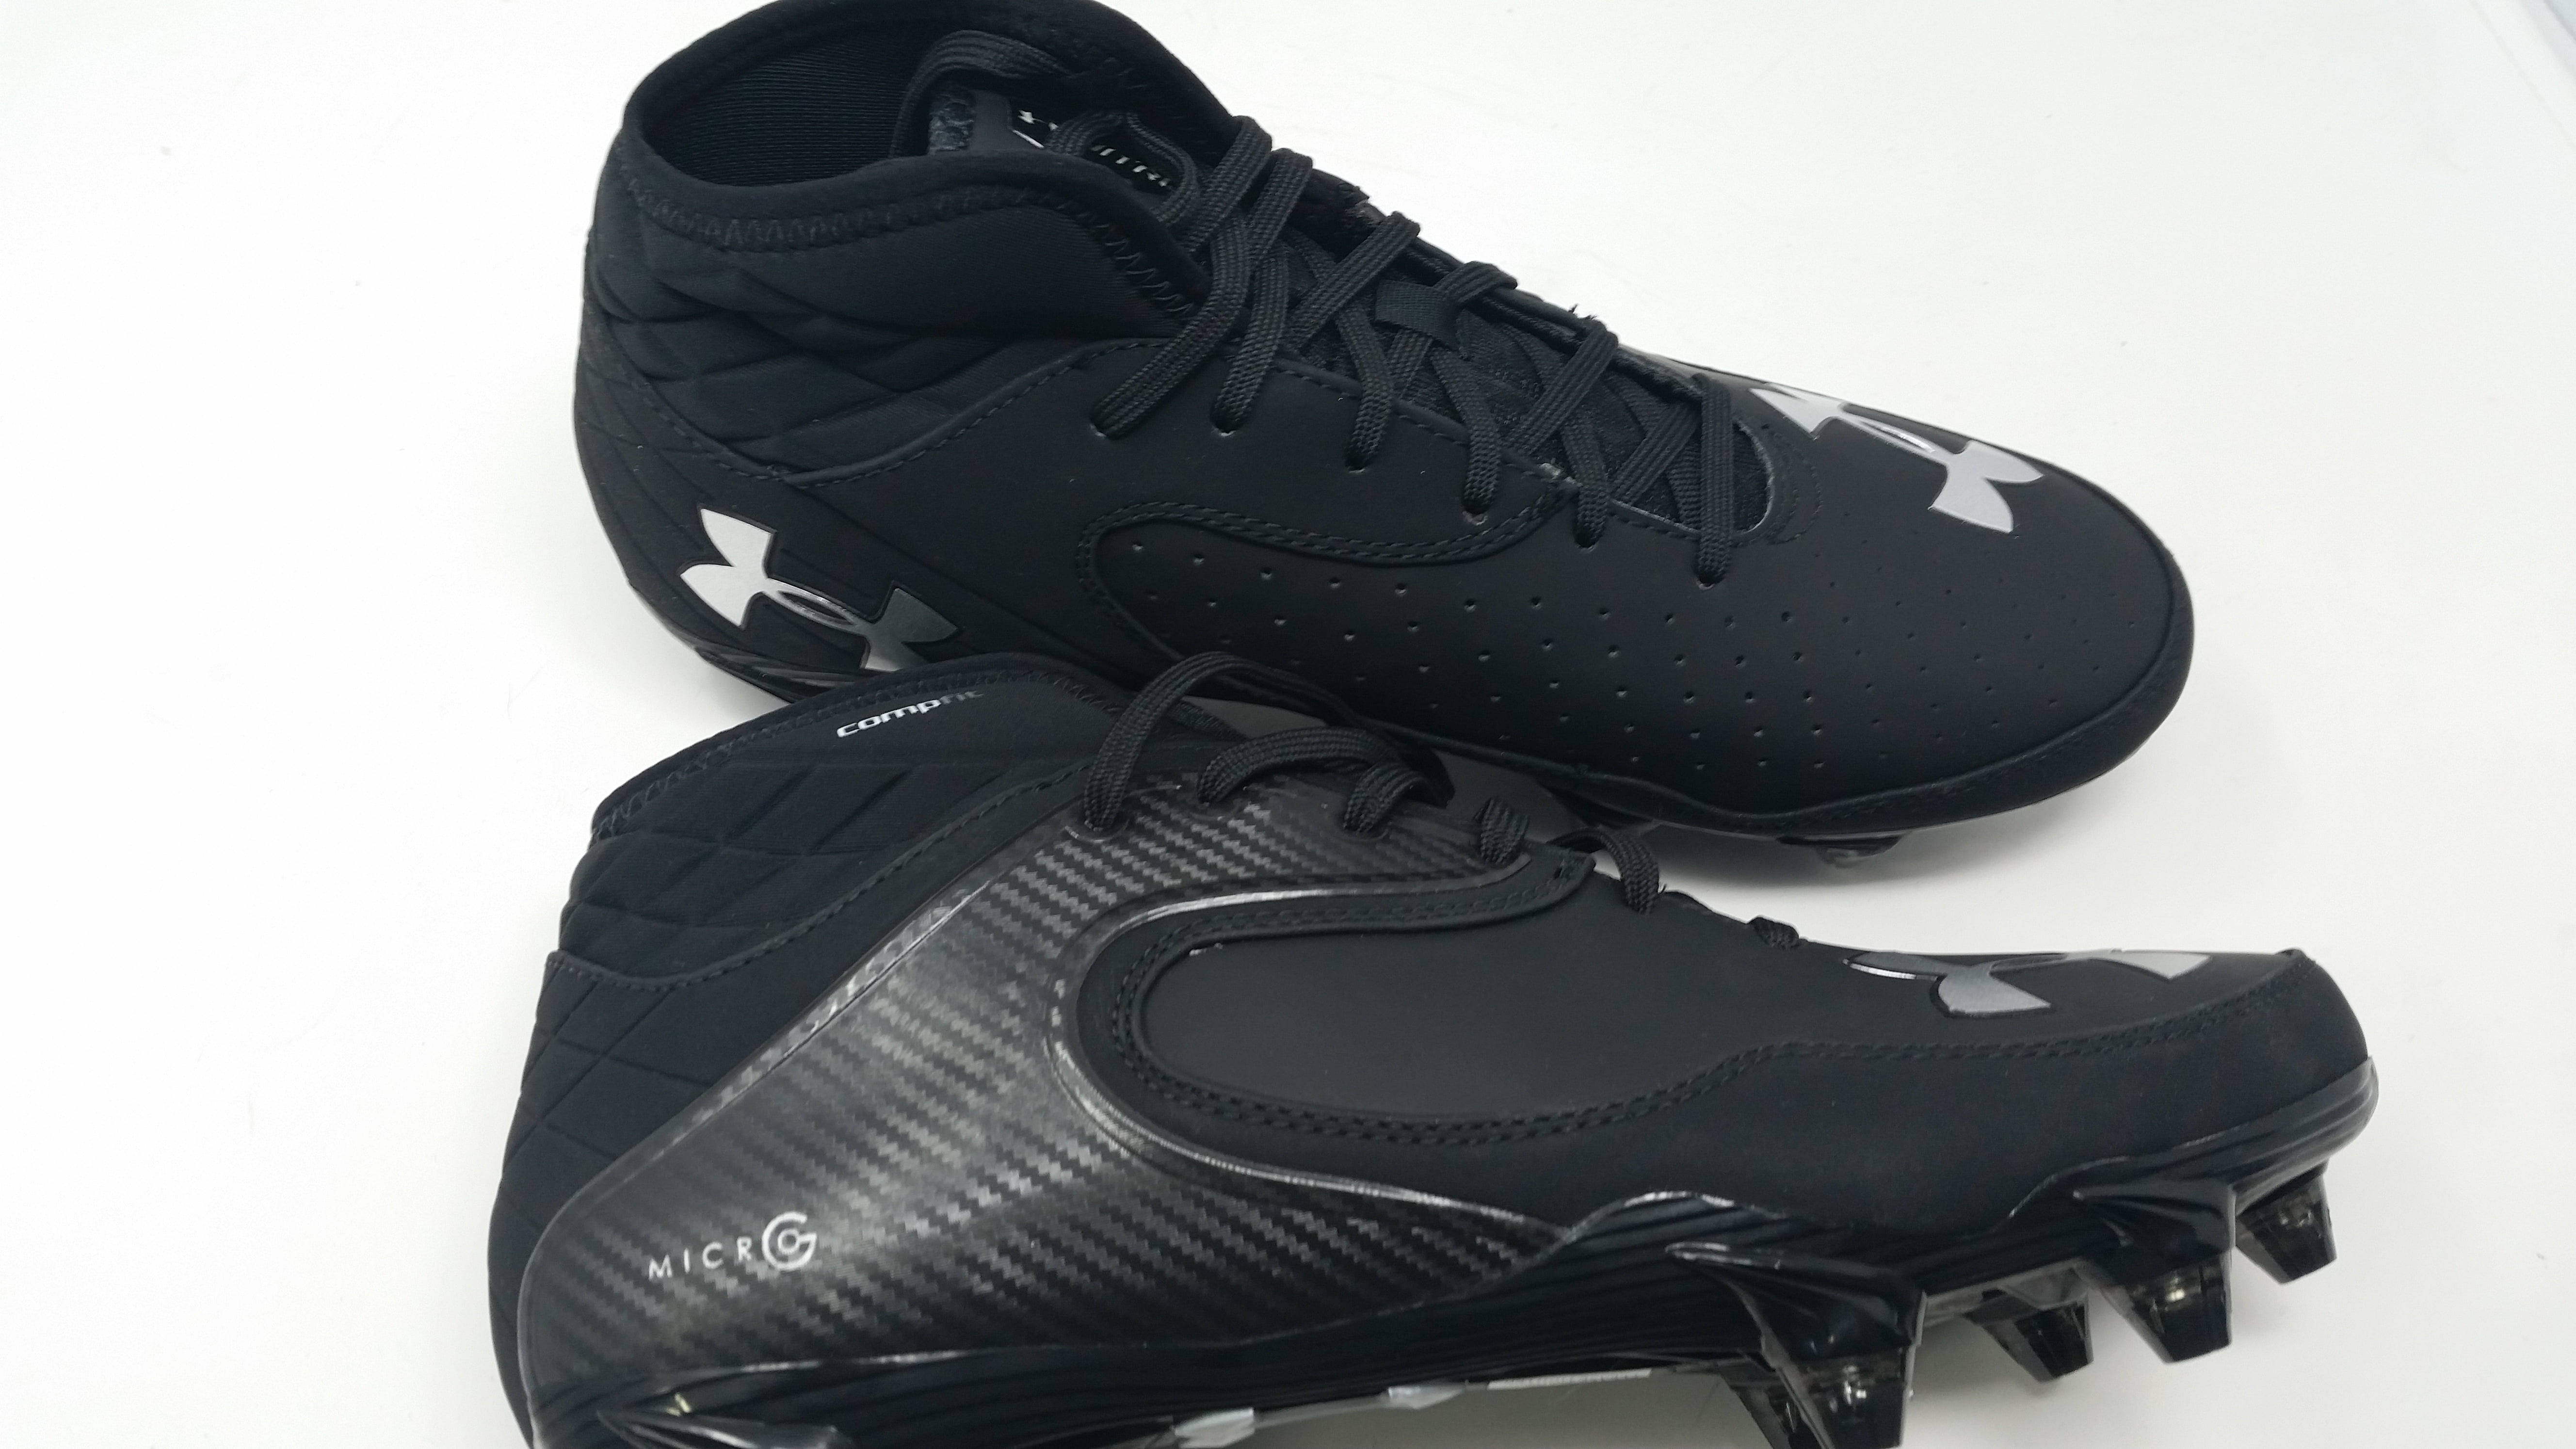 under armour icon football cleats